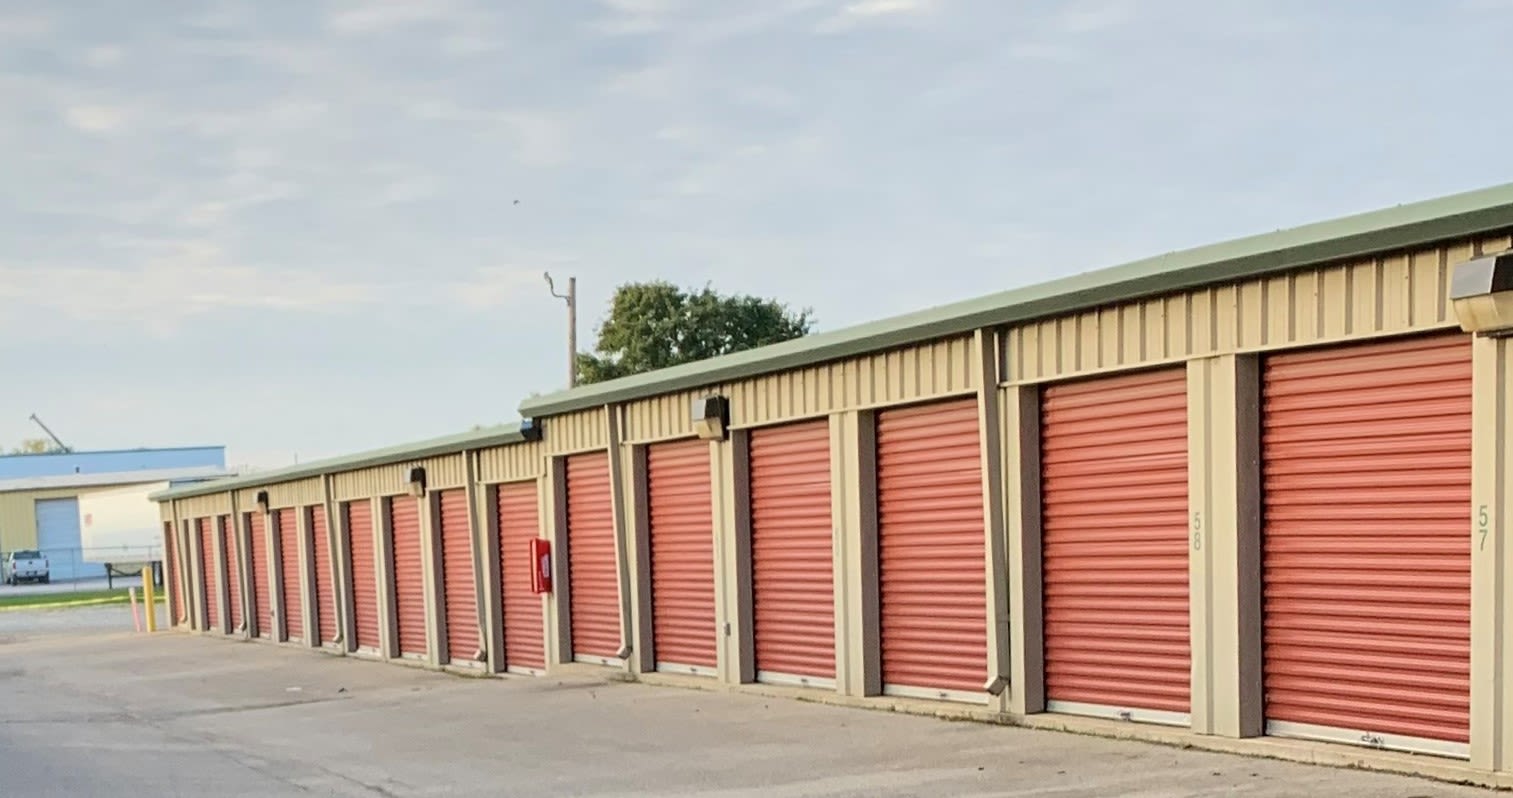 View our hours and directions at KO Storage in Tipp City, Ohio